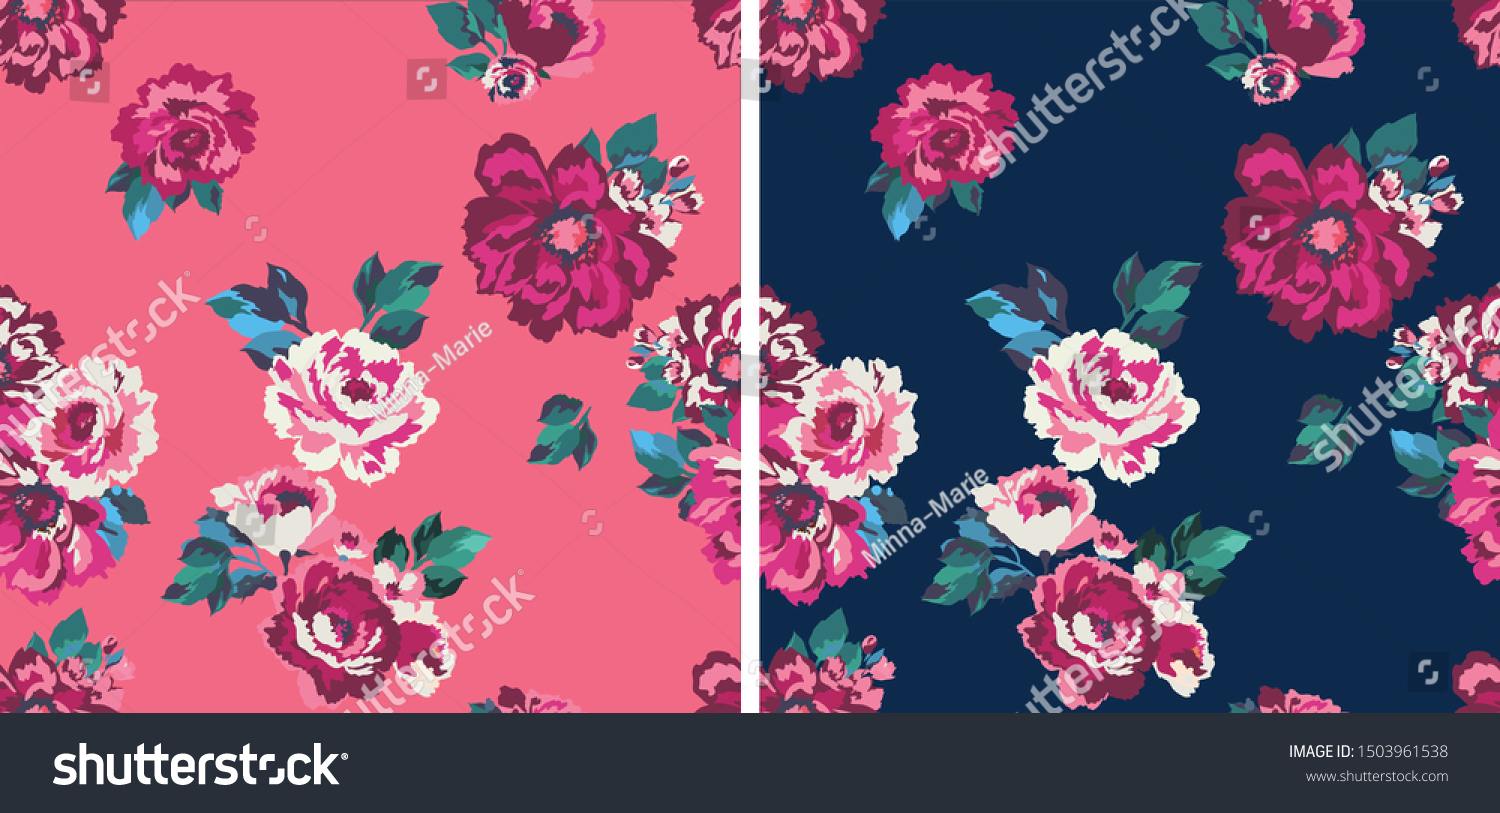 SVG of Repeatable floral pattern consisting of colorful roses on pink and blue background. svg